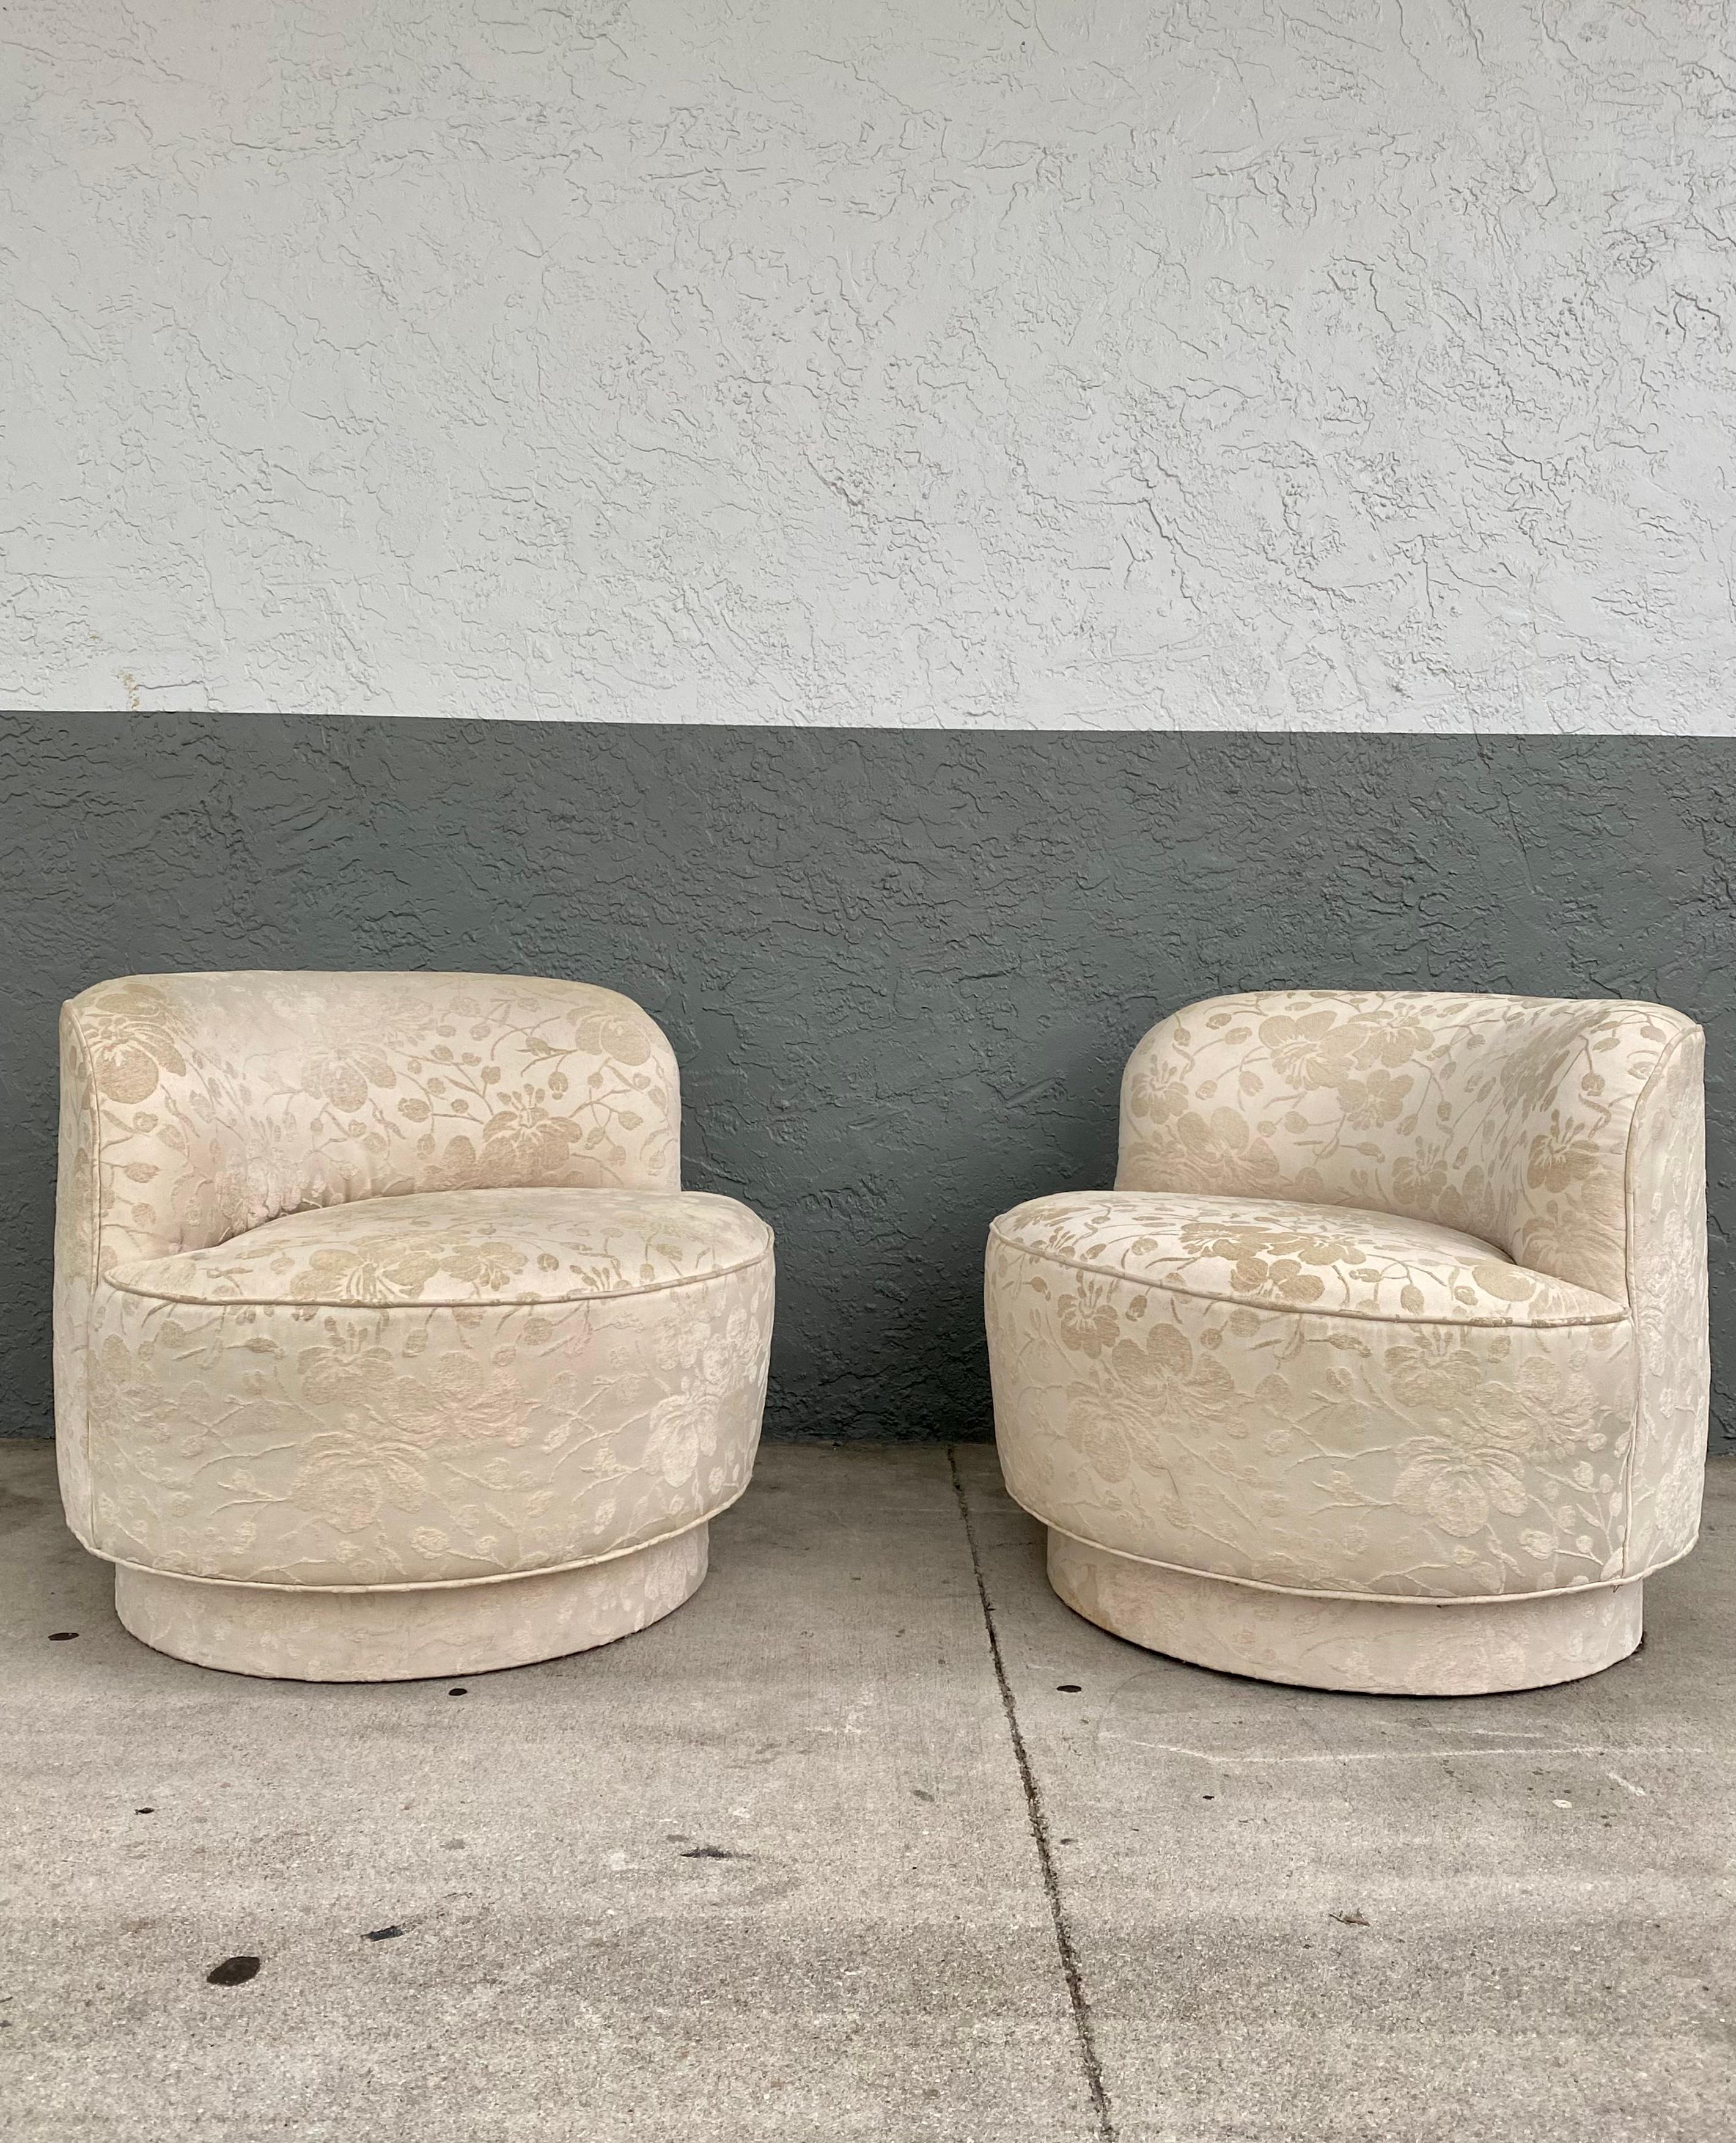 These extremely rare and stylish beige embroidered Floral velvet upholstered swivel chairs are packed with personality! Outstanding design is exhibited throughout. Their beautiful and sculptural shape are in the style of Kagan. The chairs feature a